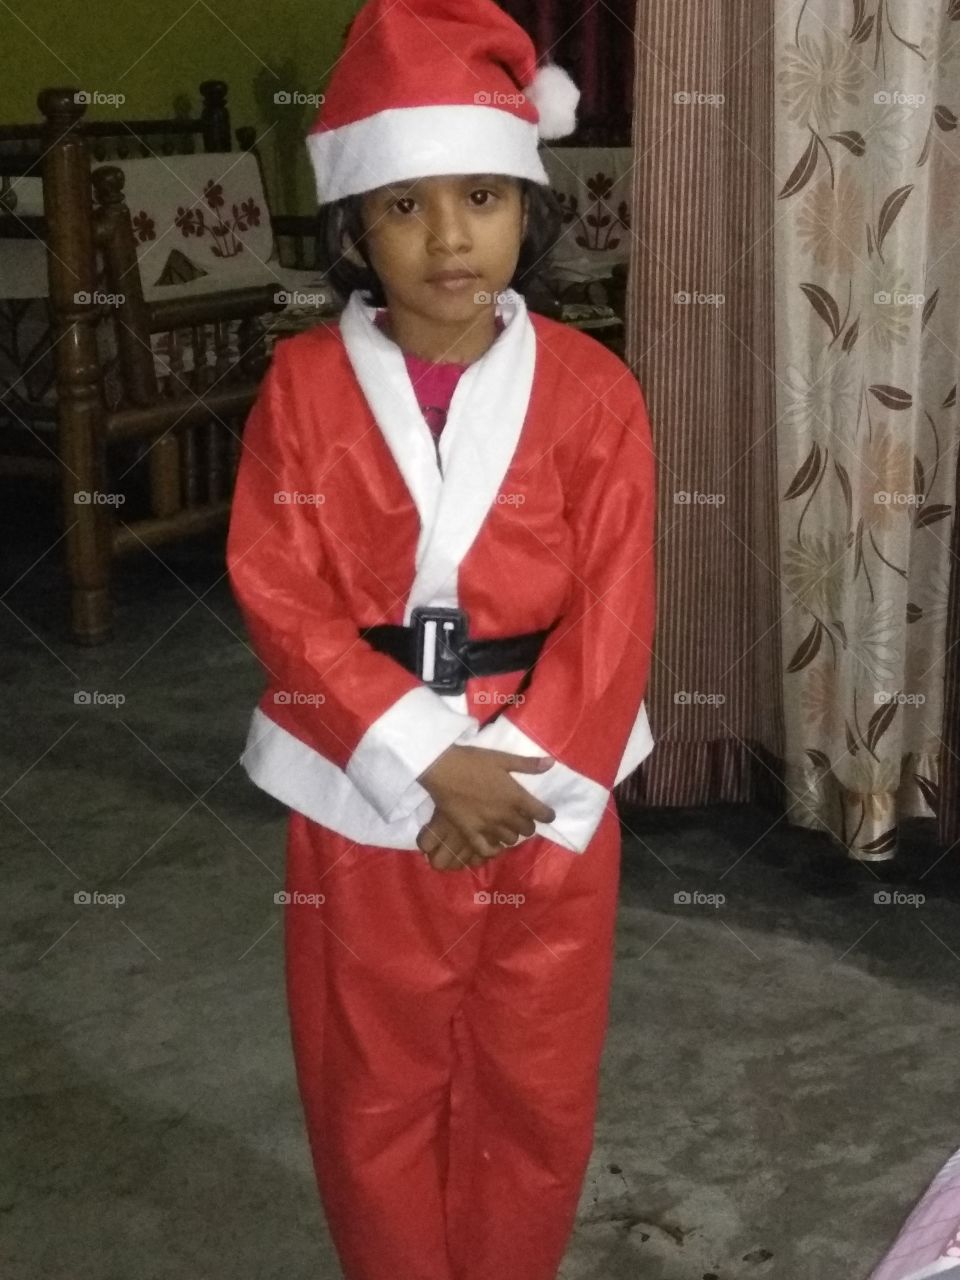 Little girl undisguised as Santa Claus